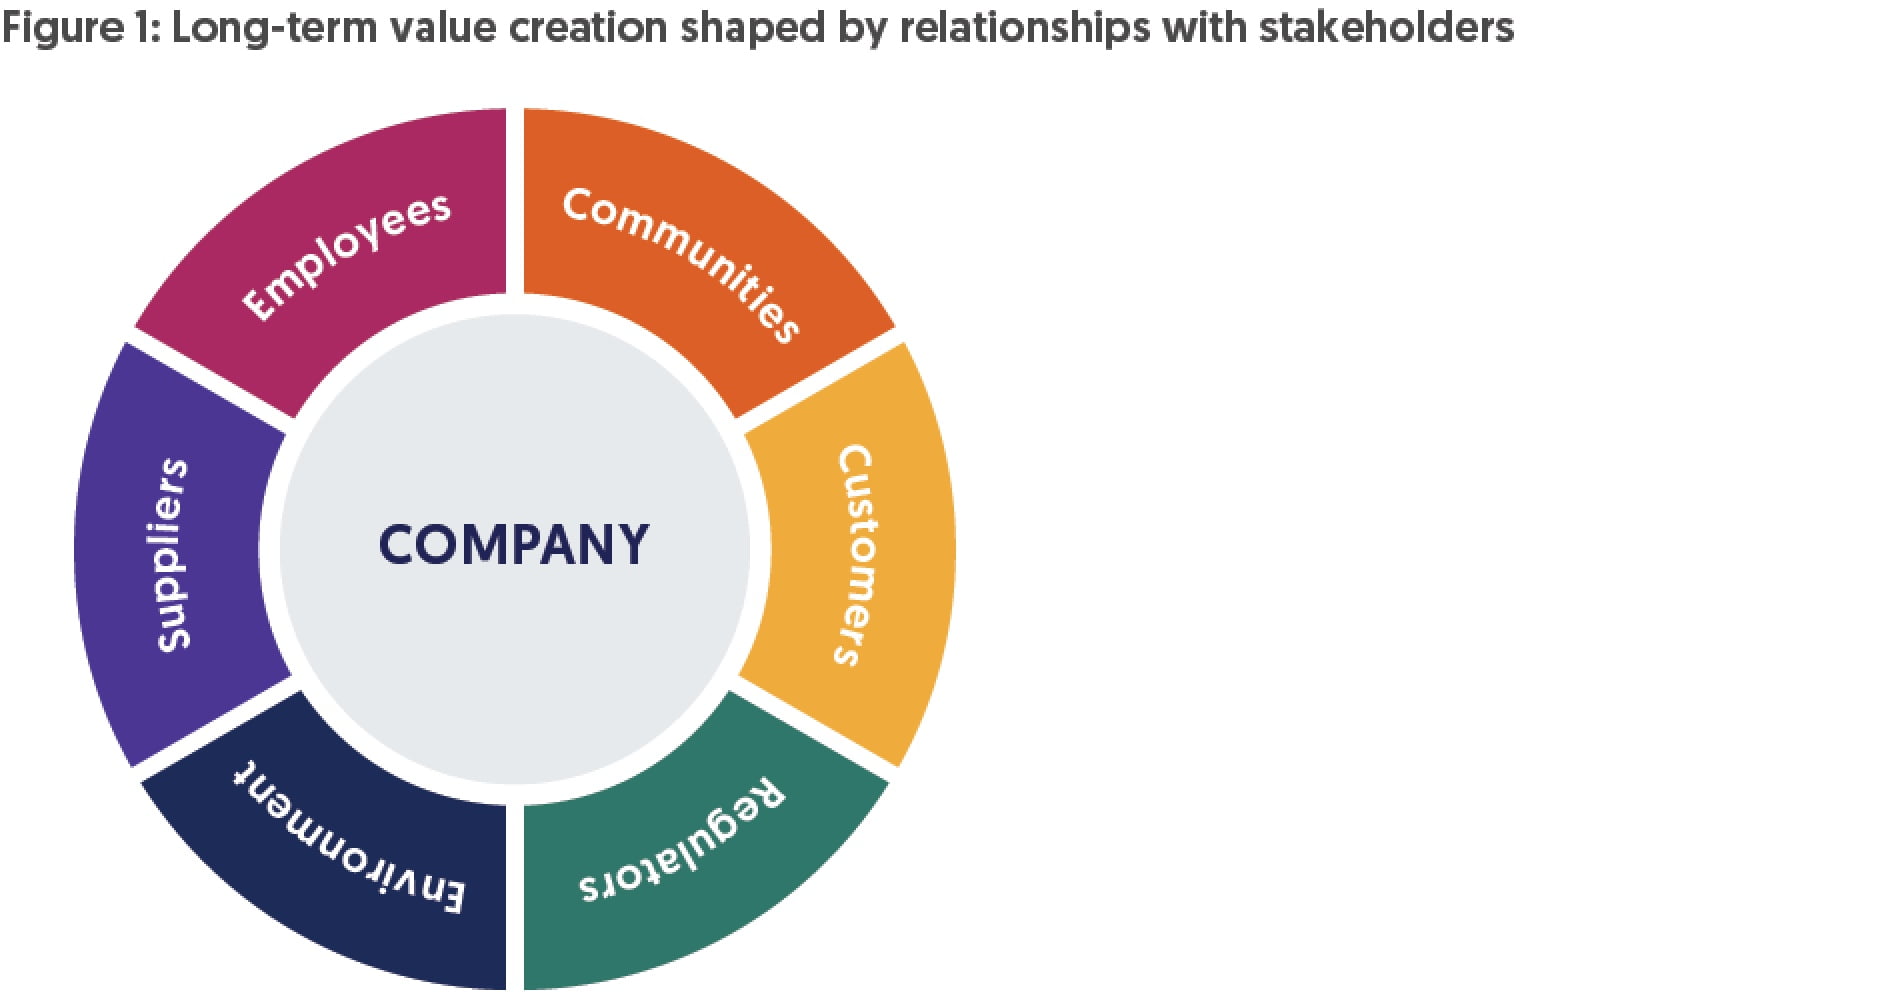 Figure 1: Long-term value creation shaped by relationships with stakeholders